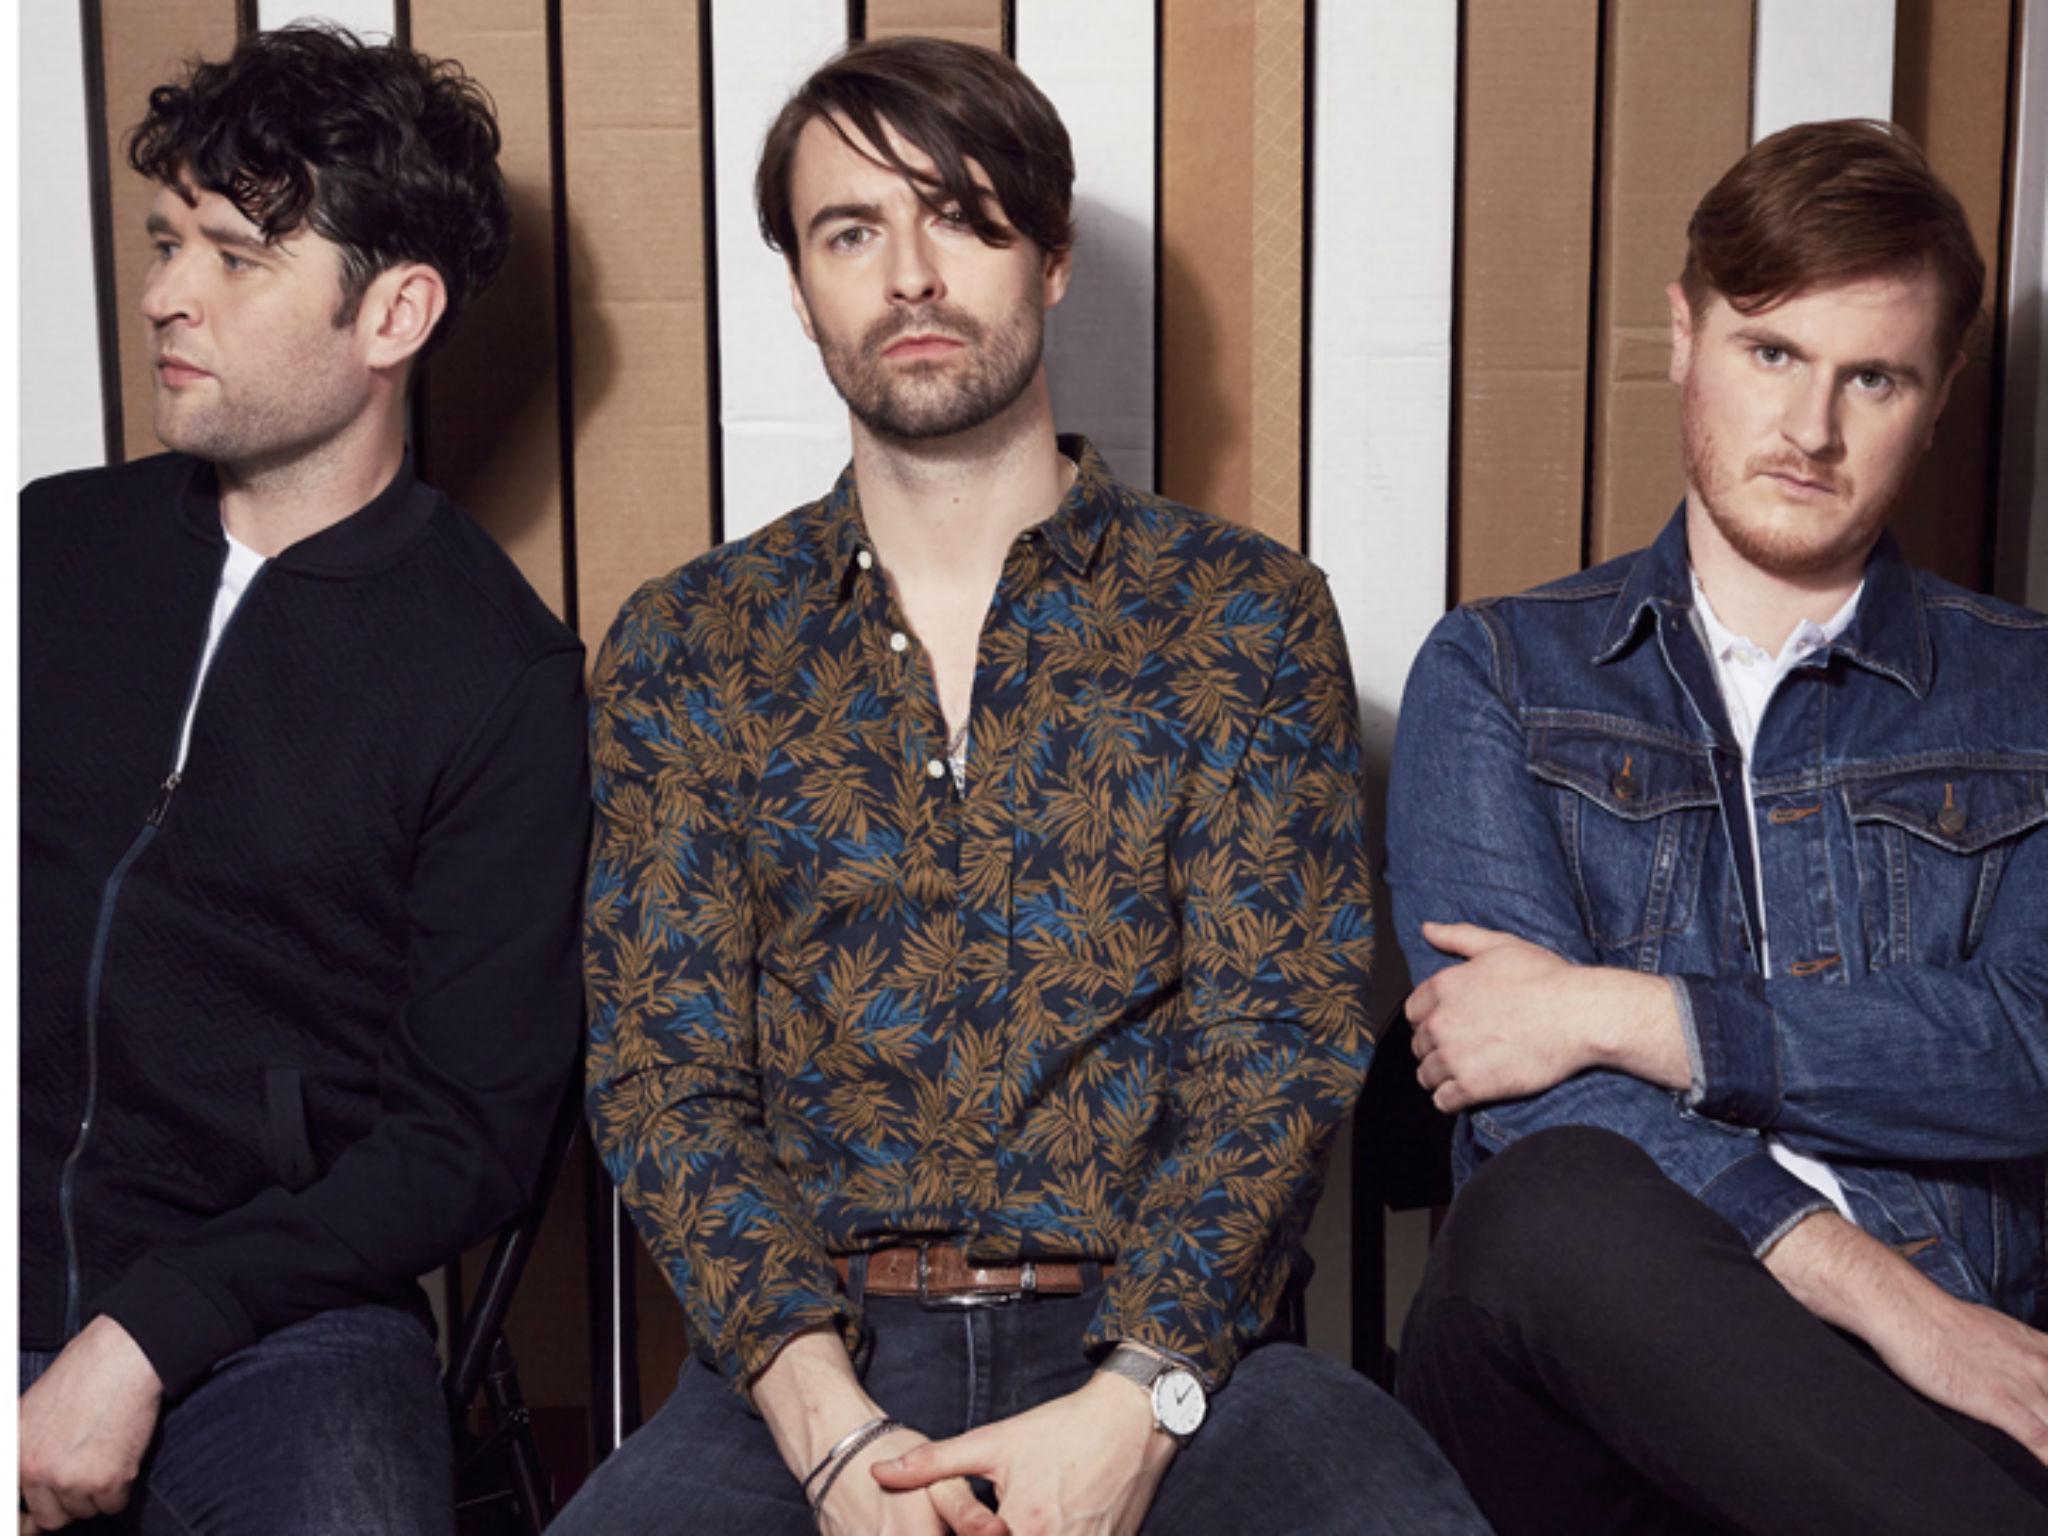 Michael Campbell (left), Liam Fray (centre) and Daniel Moores (right) of Courteeners